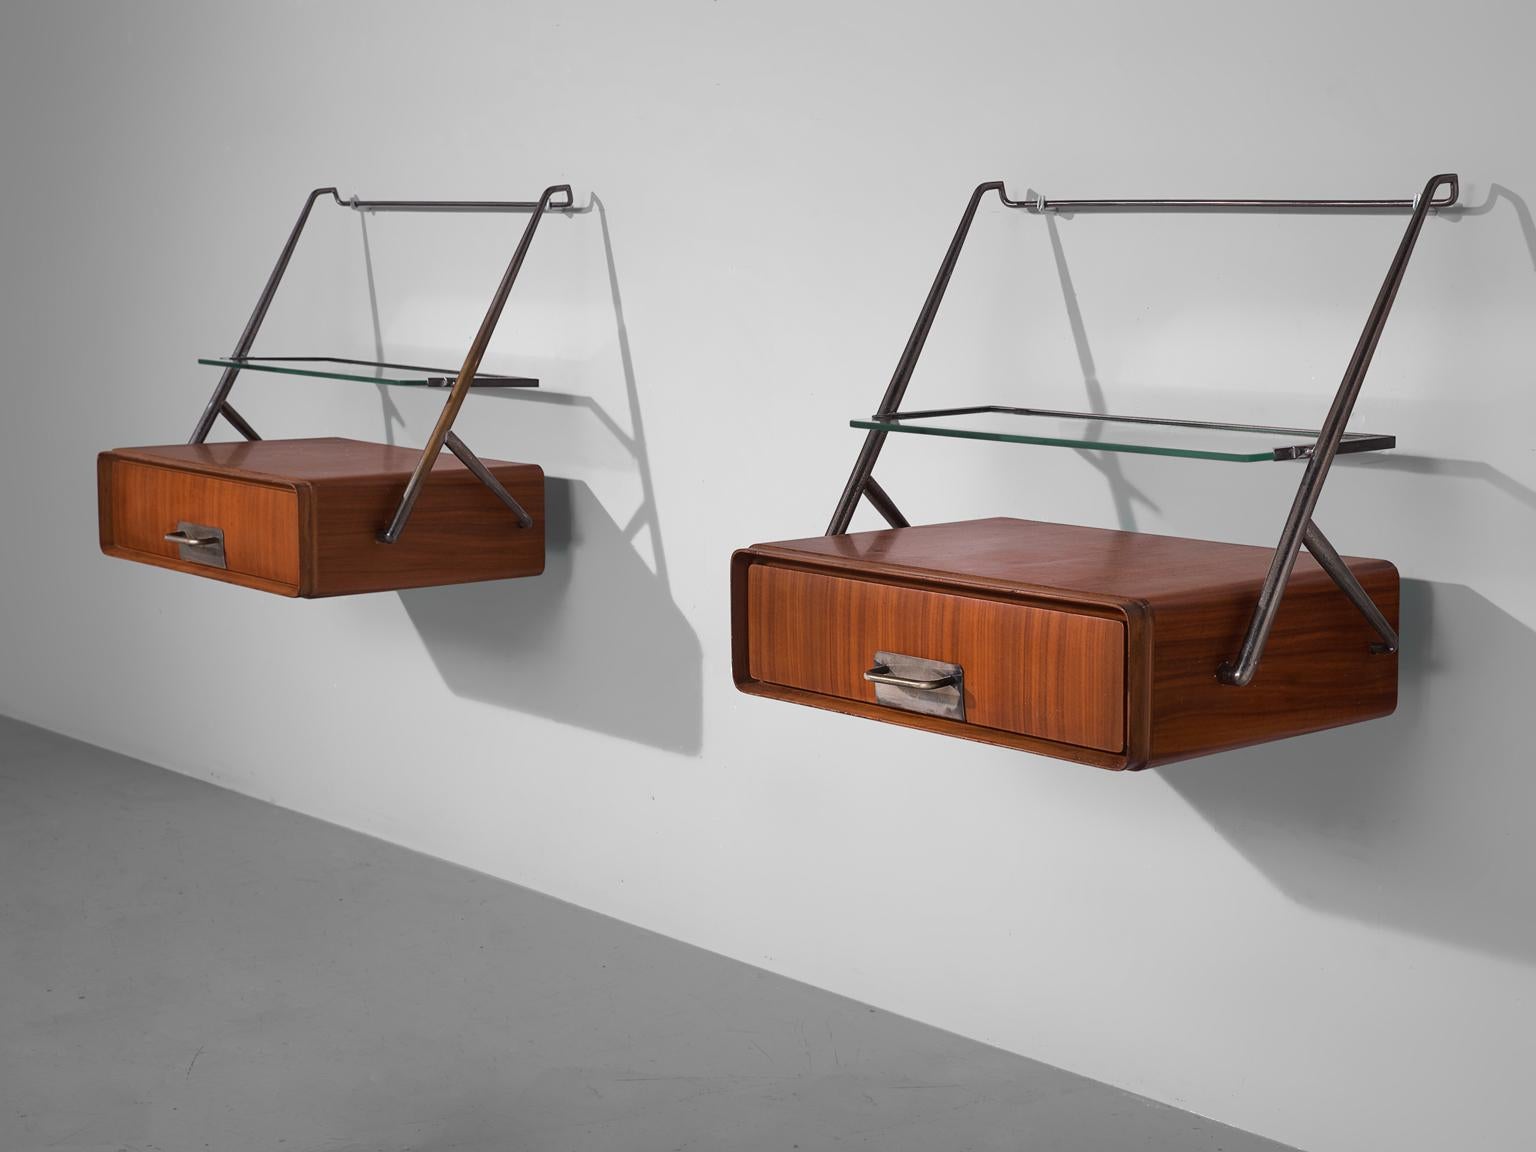 Night stands by Silvio Cavatorta, maple, brass, glass, Italy, 1950s.

These two delicate bedside tables are designed by the Italian Silvio Cavatorta. The little cabinets feature one door in each maple compartment and on top a brass frame with a